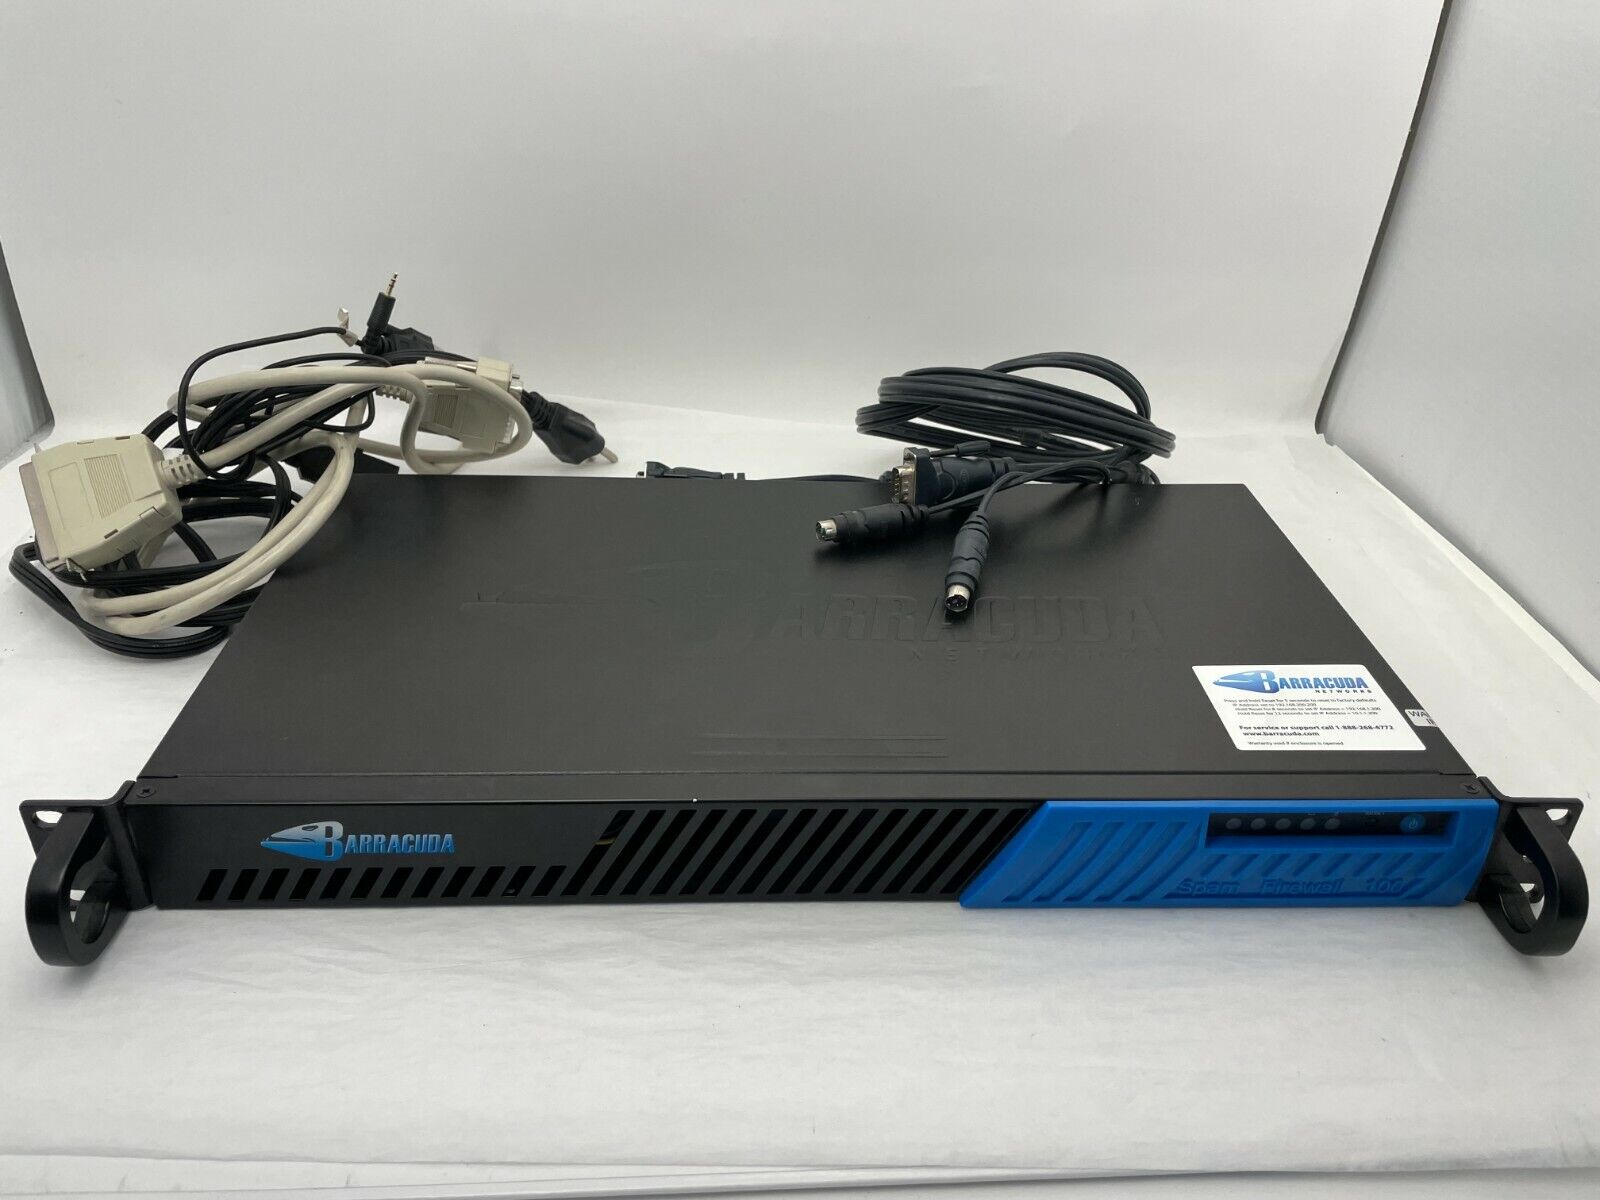 BARRACUDA Spam Firewall 100 BAR-SF-122389 With All Wires and Power Supply